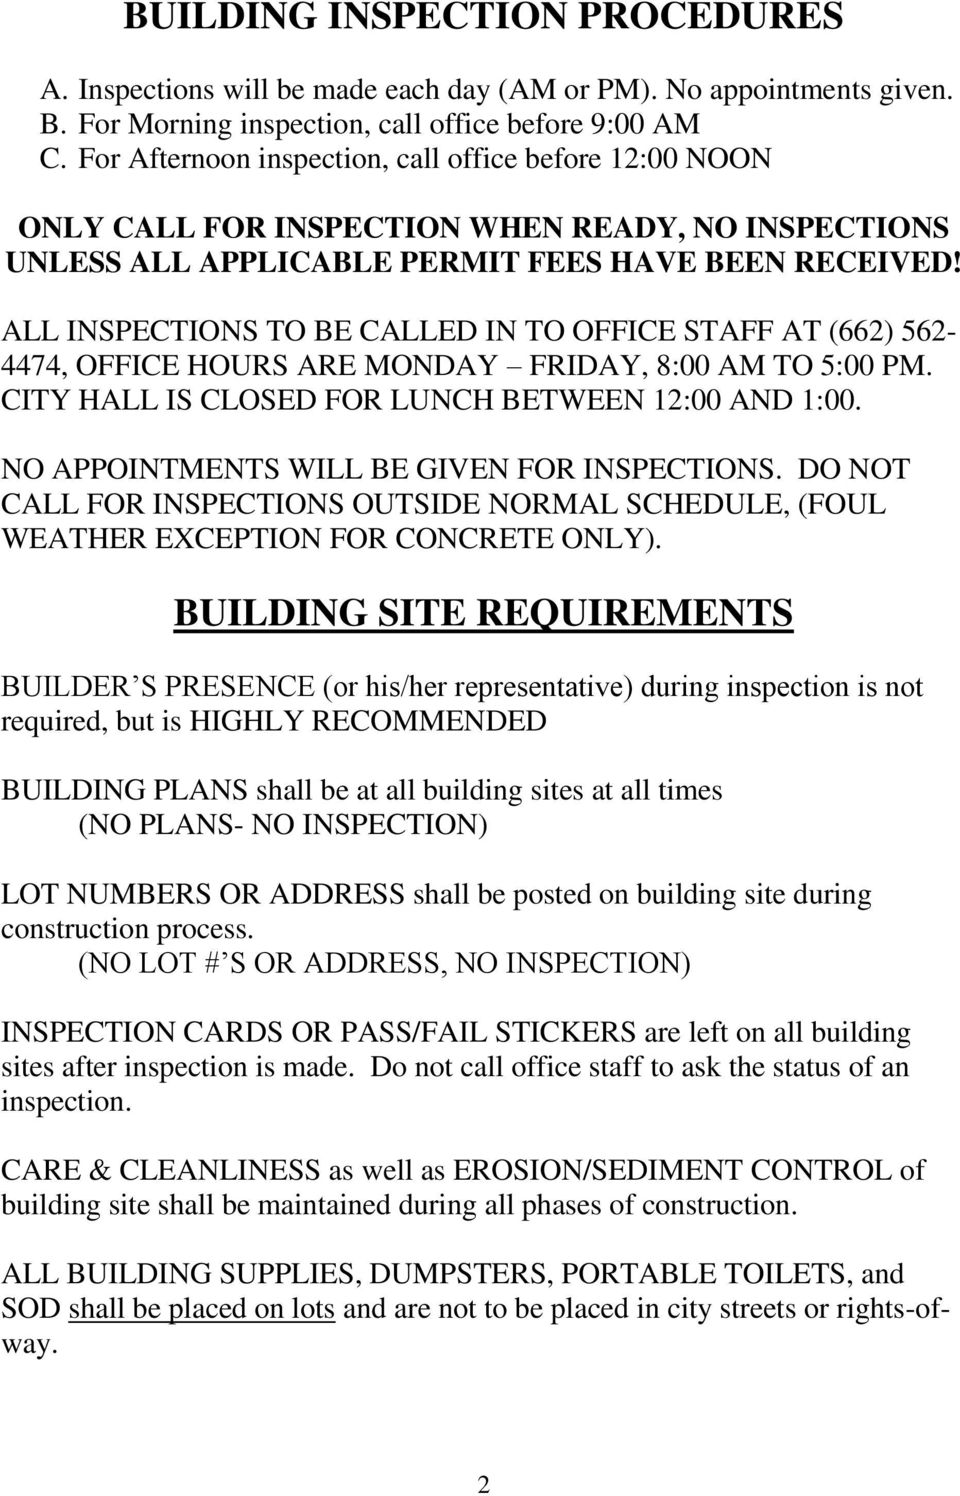 ALL INSPECTIONS TO BE CALLED IN TO OFFICE STAFF AT (662) 562-4474, OFFICE HOURS ARE MONDAY FRIDAY, 8:00 AM TO 5:00 PM. CITY HALL IS CLOSED FOR LUNCH BETWEEN 12:00 AND 1:00.